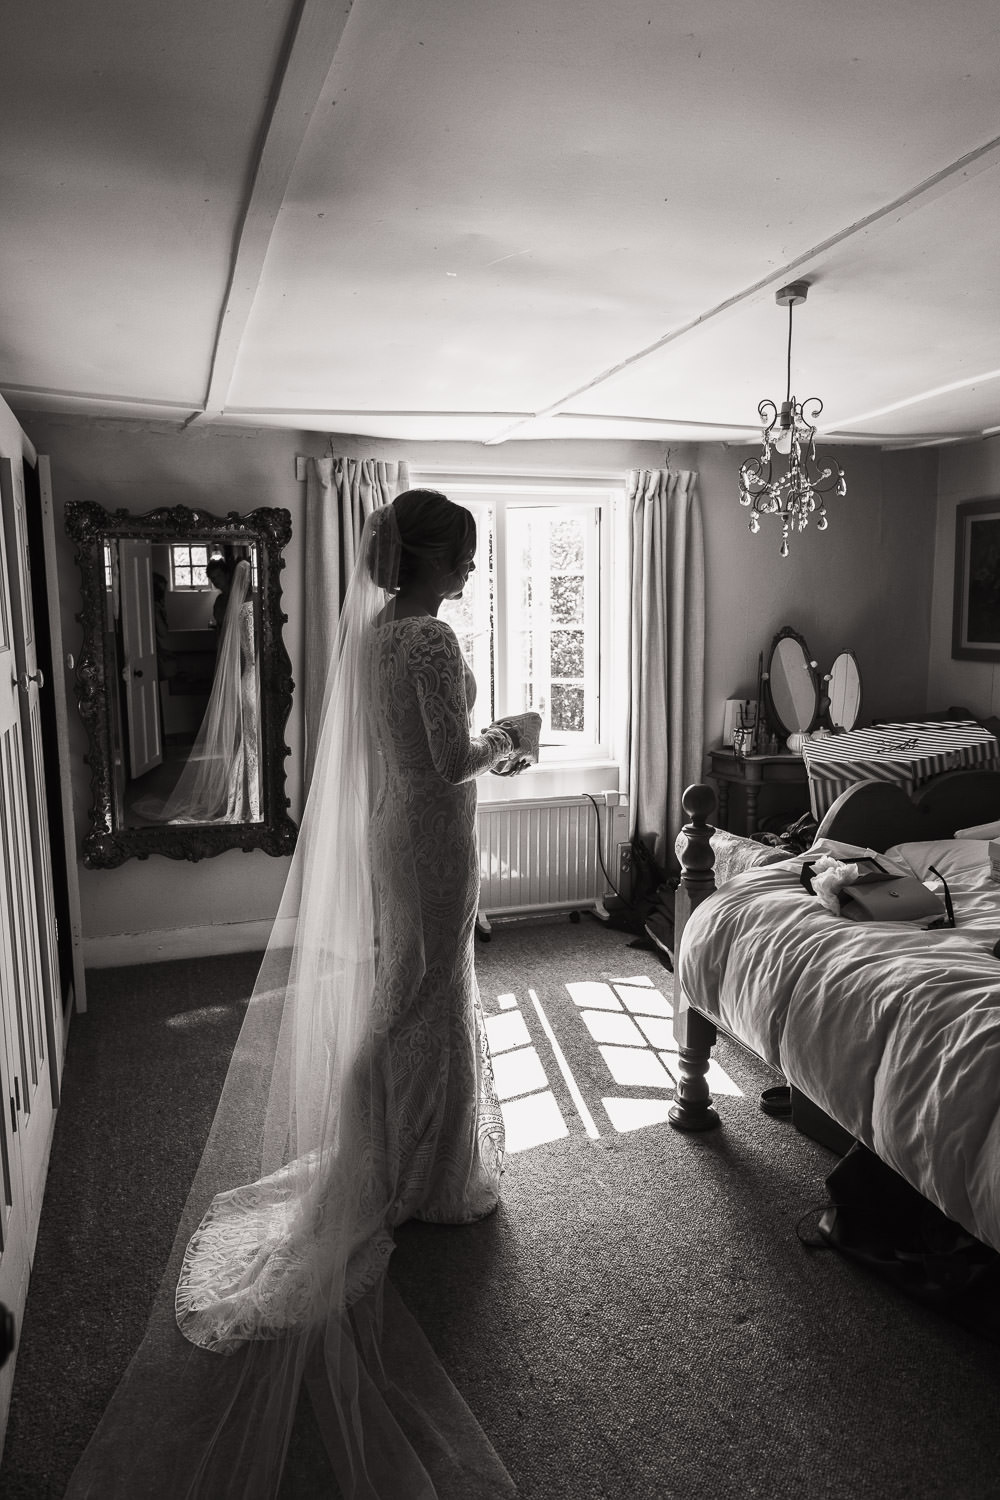 Bride in full length lace dress and veil stands in bedroom with sunlight streaming through window, holding purse. Custom-made by Louise Sullivan of Louise Bridal, Stow Maries near South Woodham.